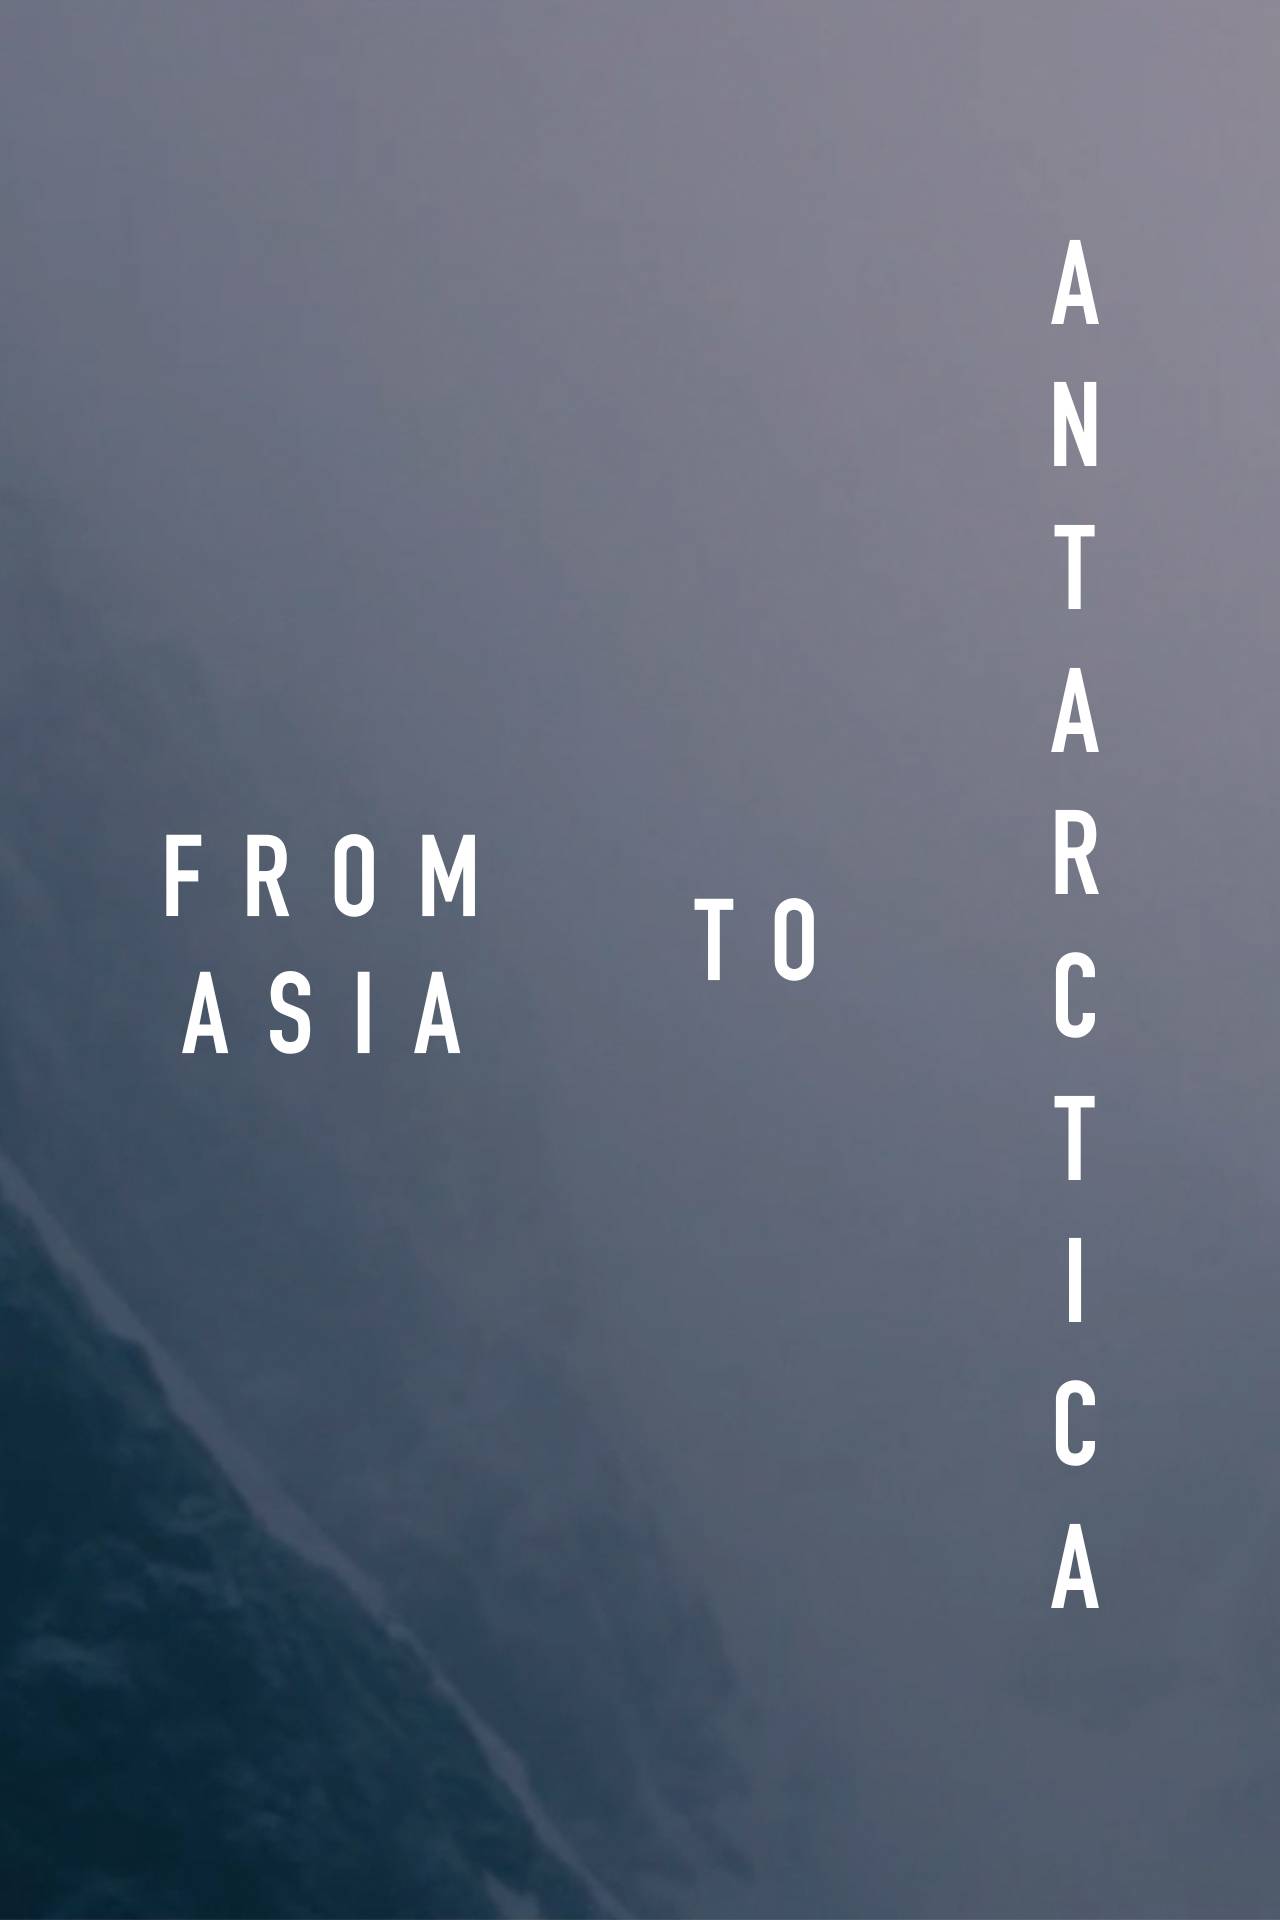 From Asia to Antarctica (AD)